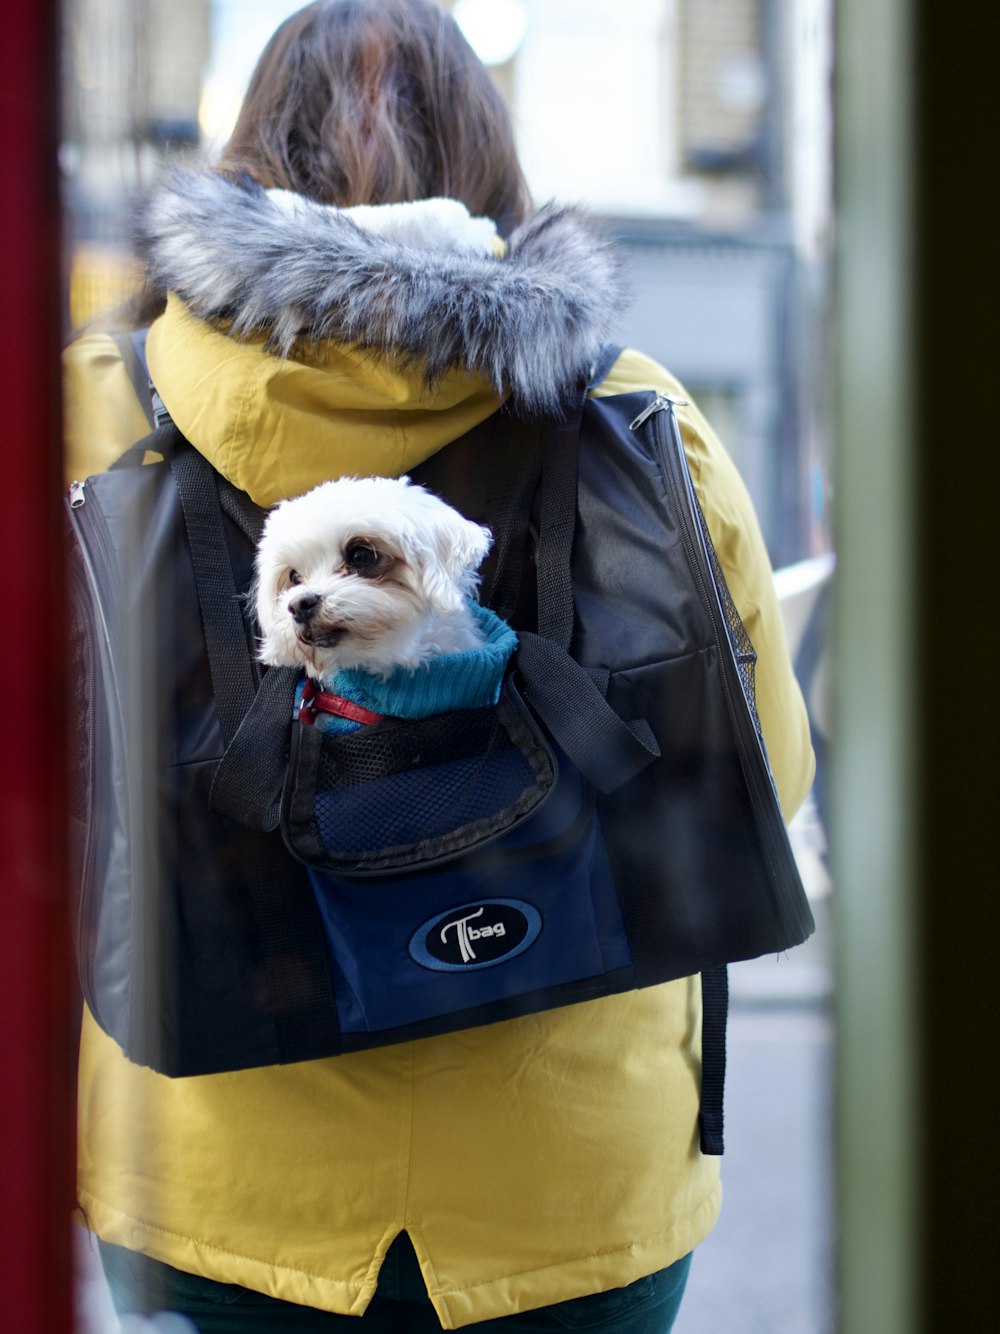 a person carrying a dog in a backpack